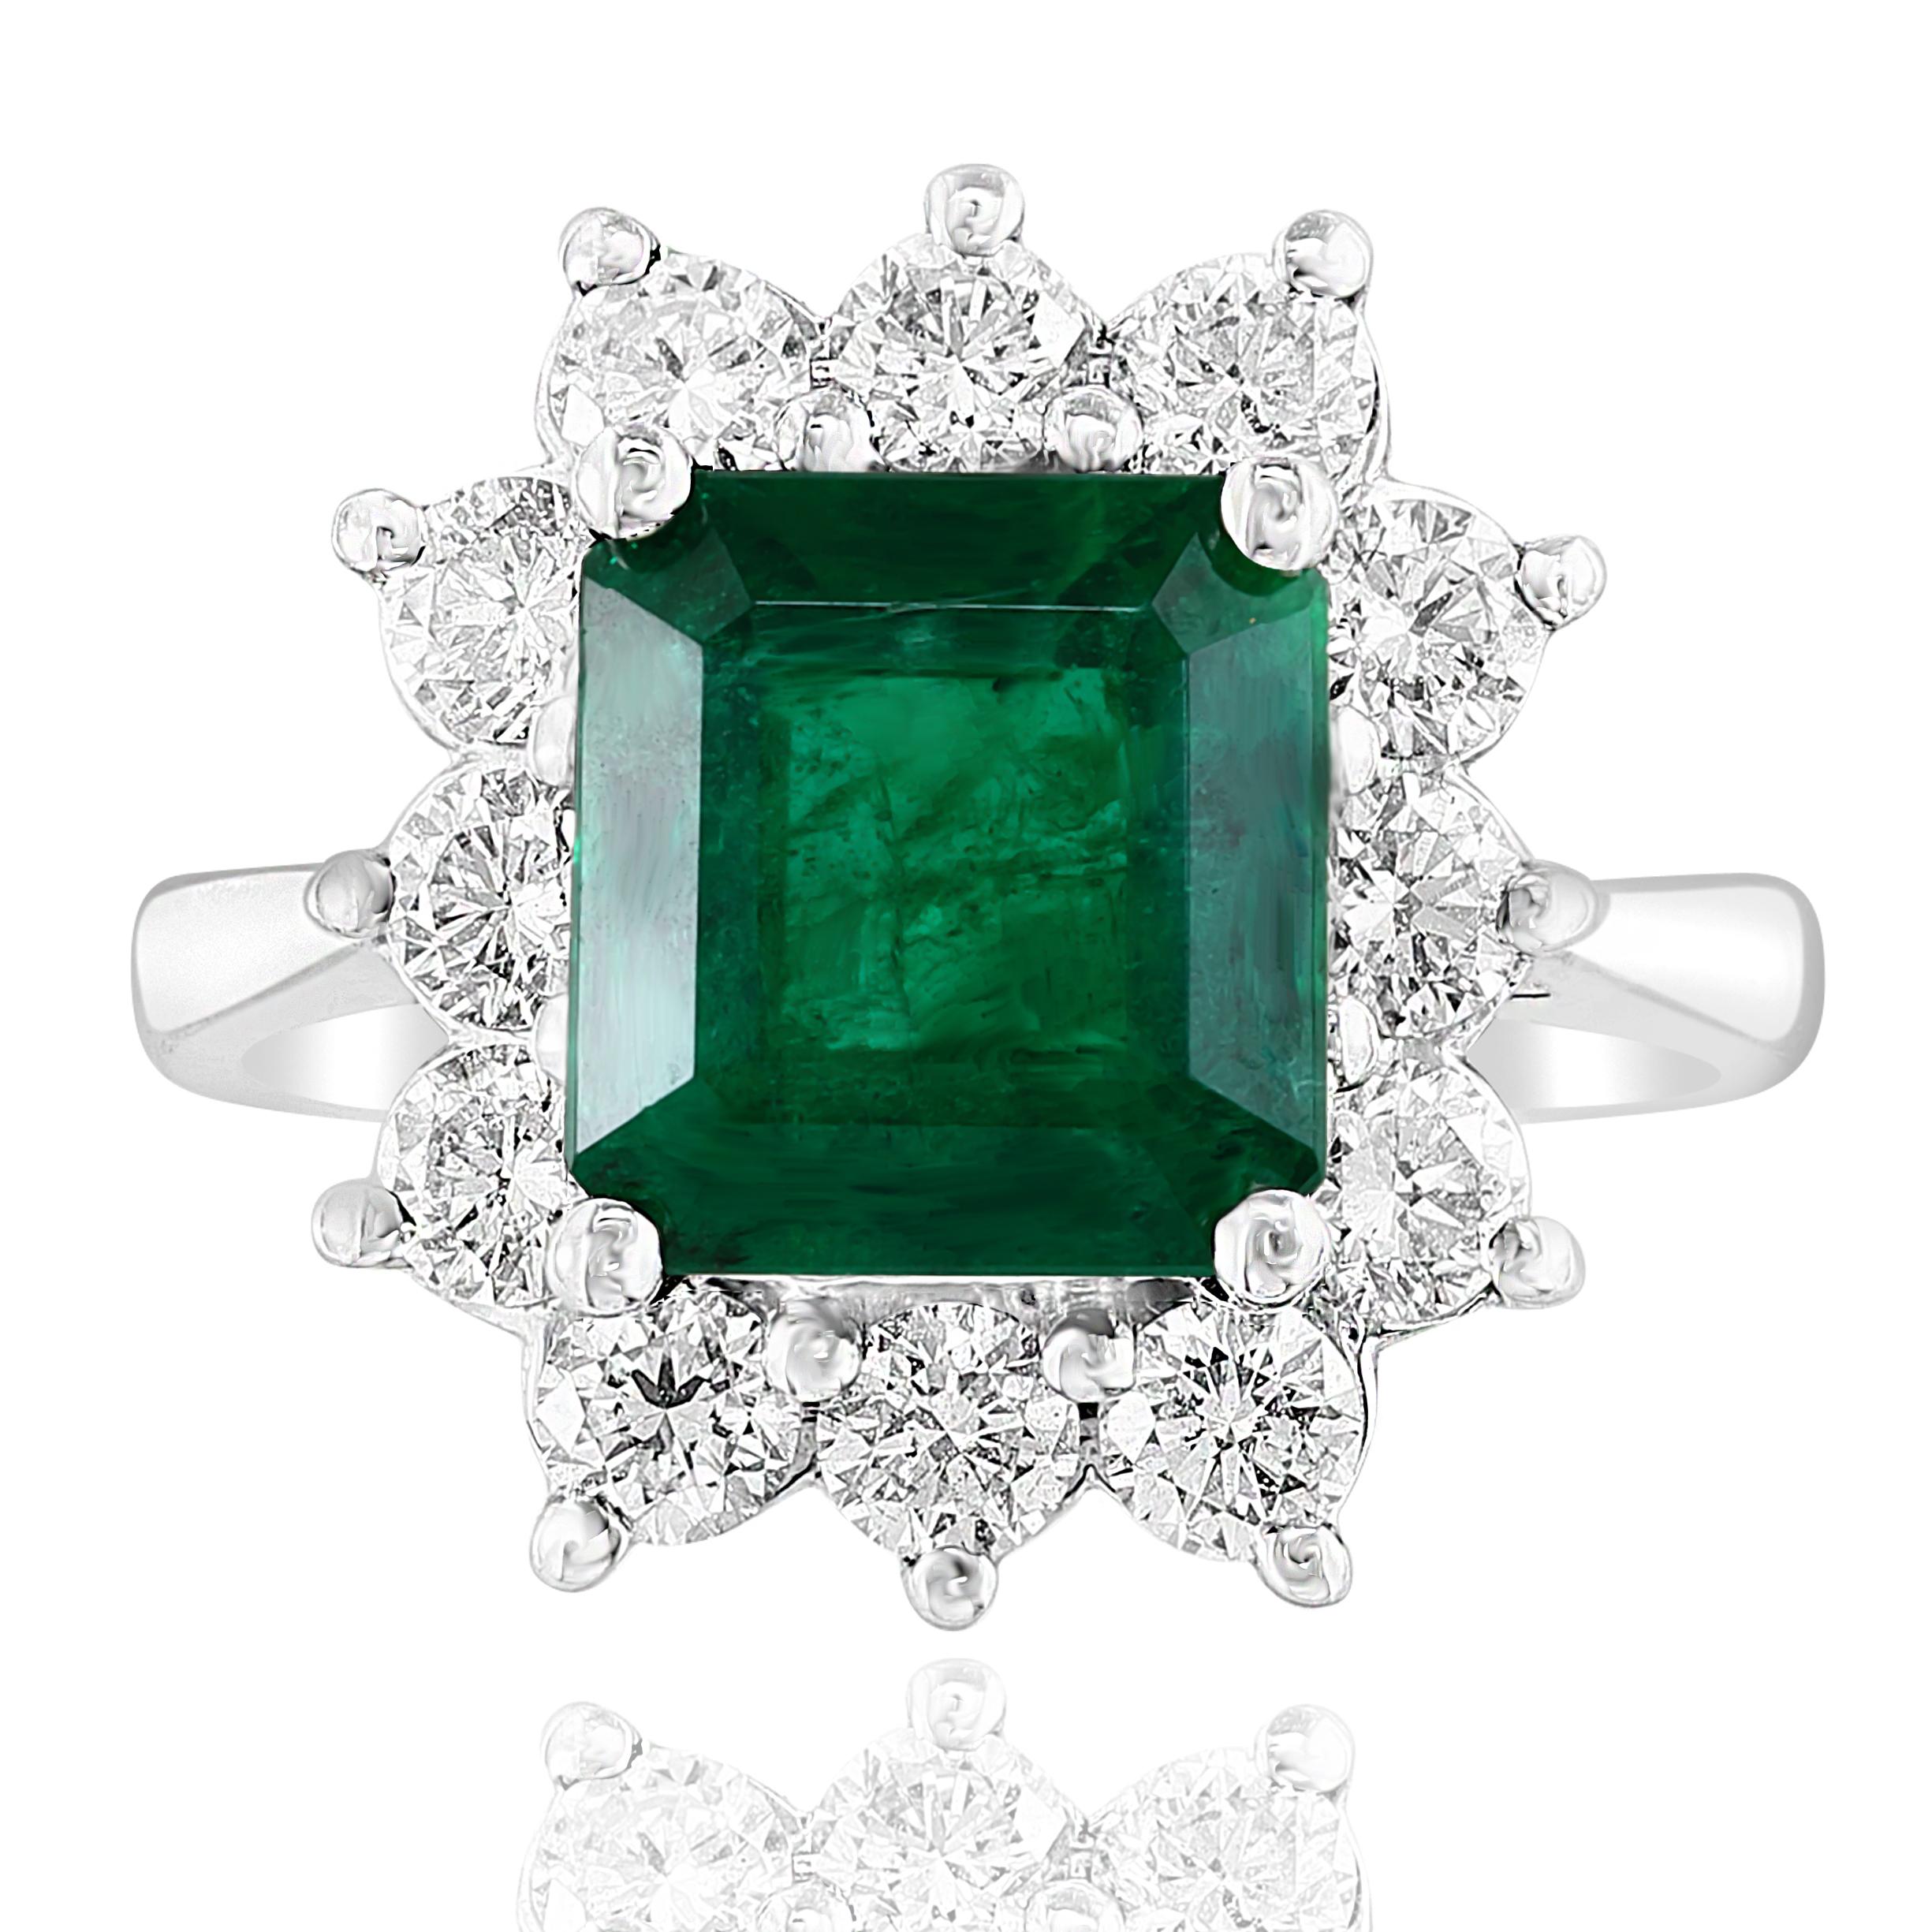 A stunning well-crafted engagement ring showcasing a 3.17-carat certified emerald-cut vivid green emerald. Flanking the center diamond are perfectly matched brilliant cut 12 diamonds weighing 1.20 carat in total, set in a polished 14K White Gold